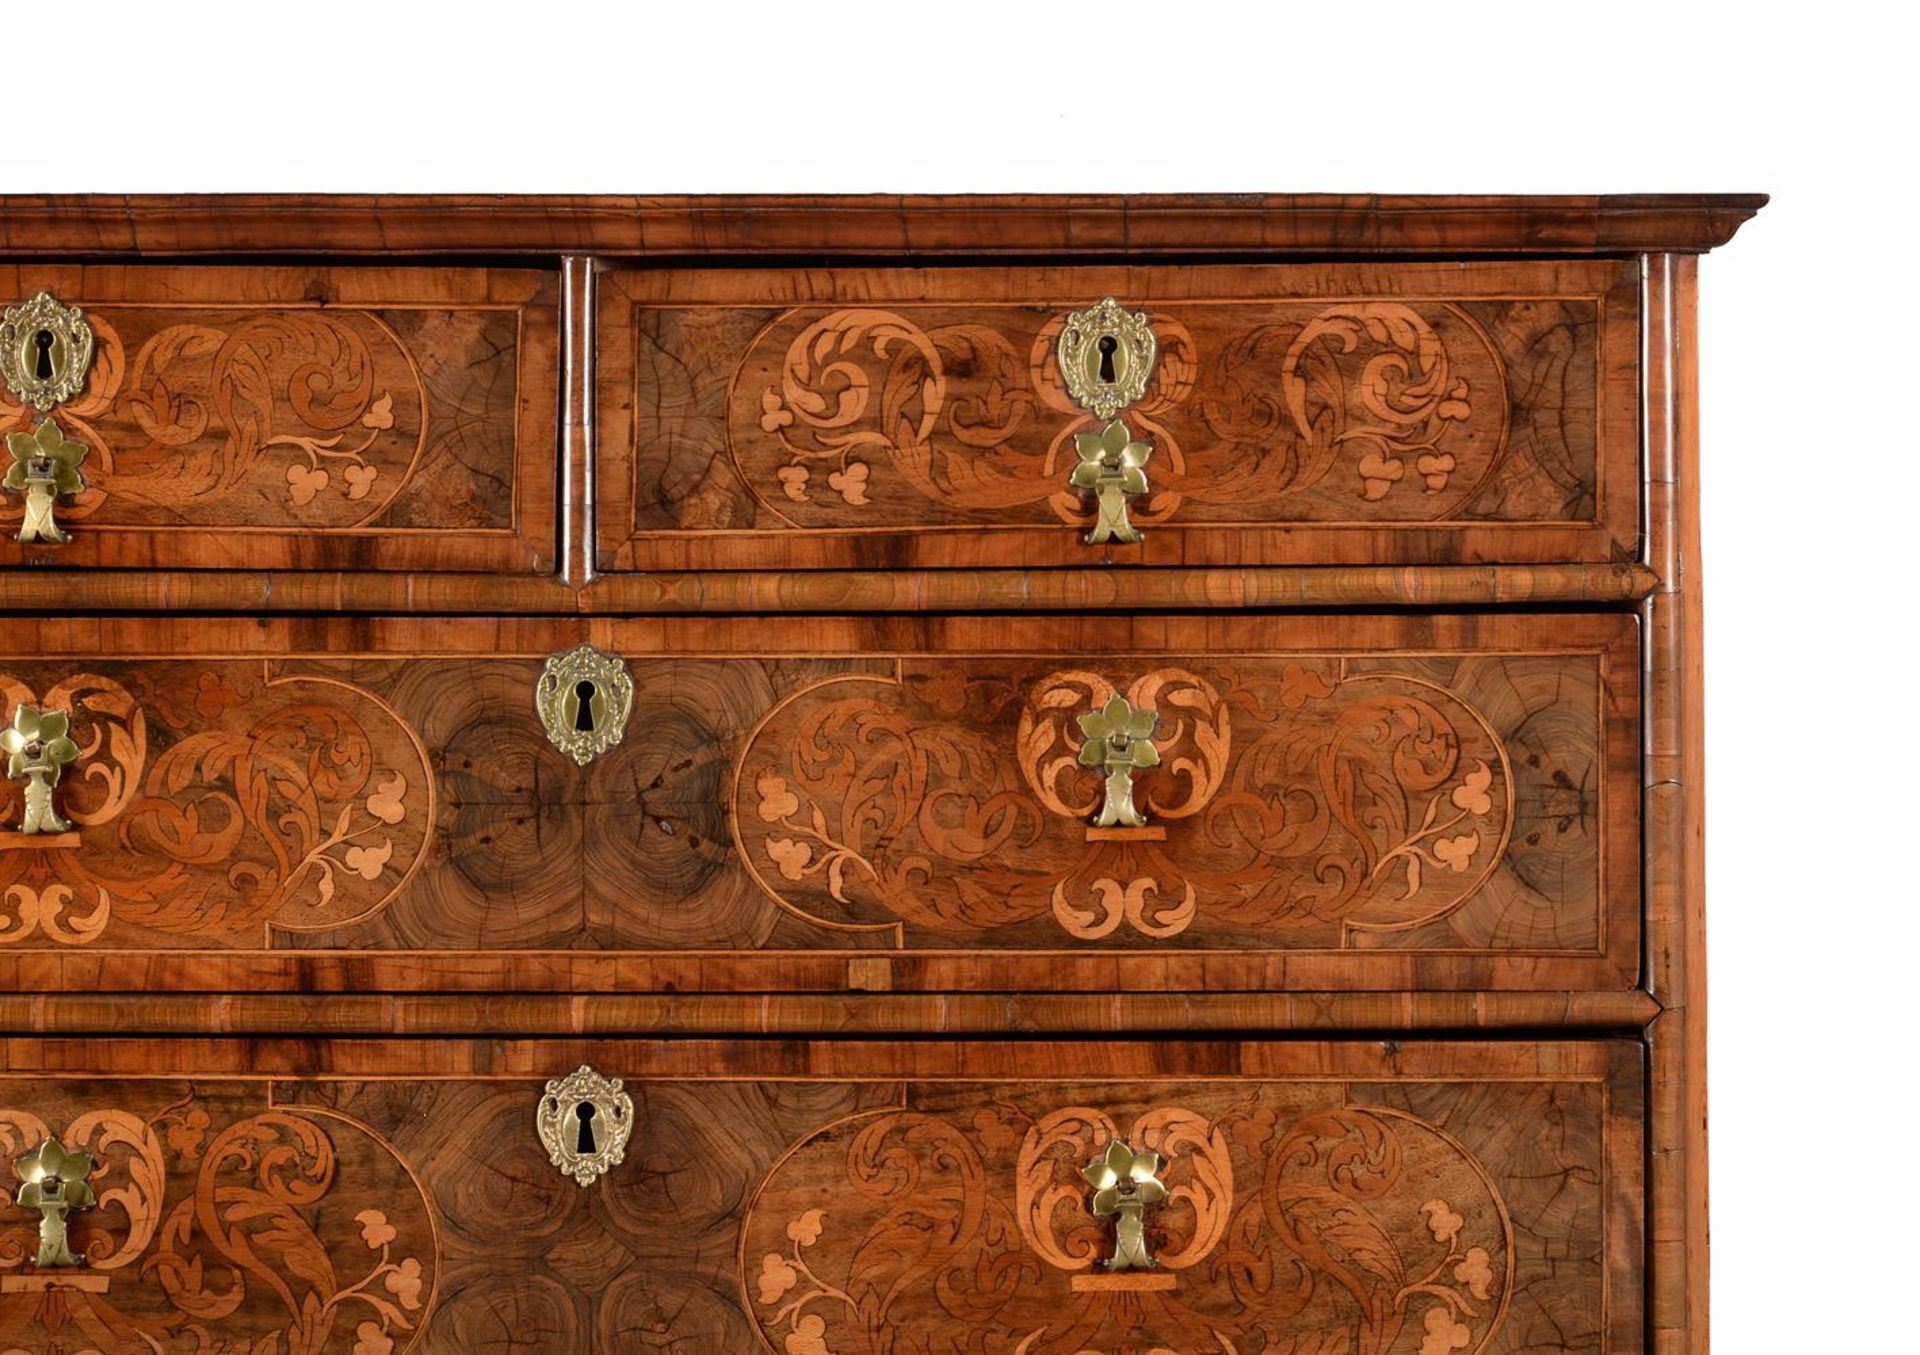 A FINE AND RARE WILLIAM & MARY WALNUT, FRUITWOOD, OLIVE-WOOD OYSTER-VENEERED CHEST ON STAND - Image 5 of 5